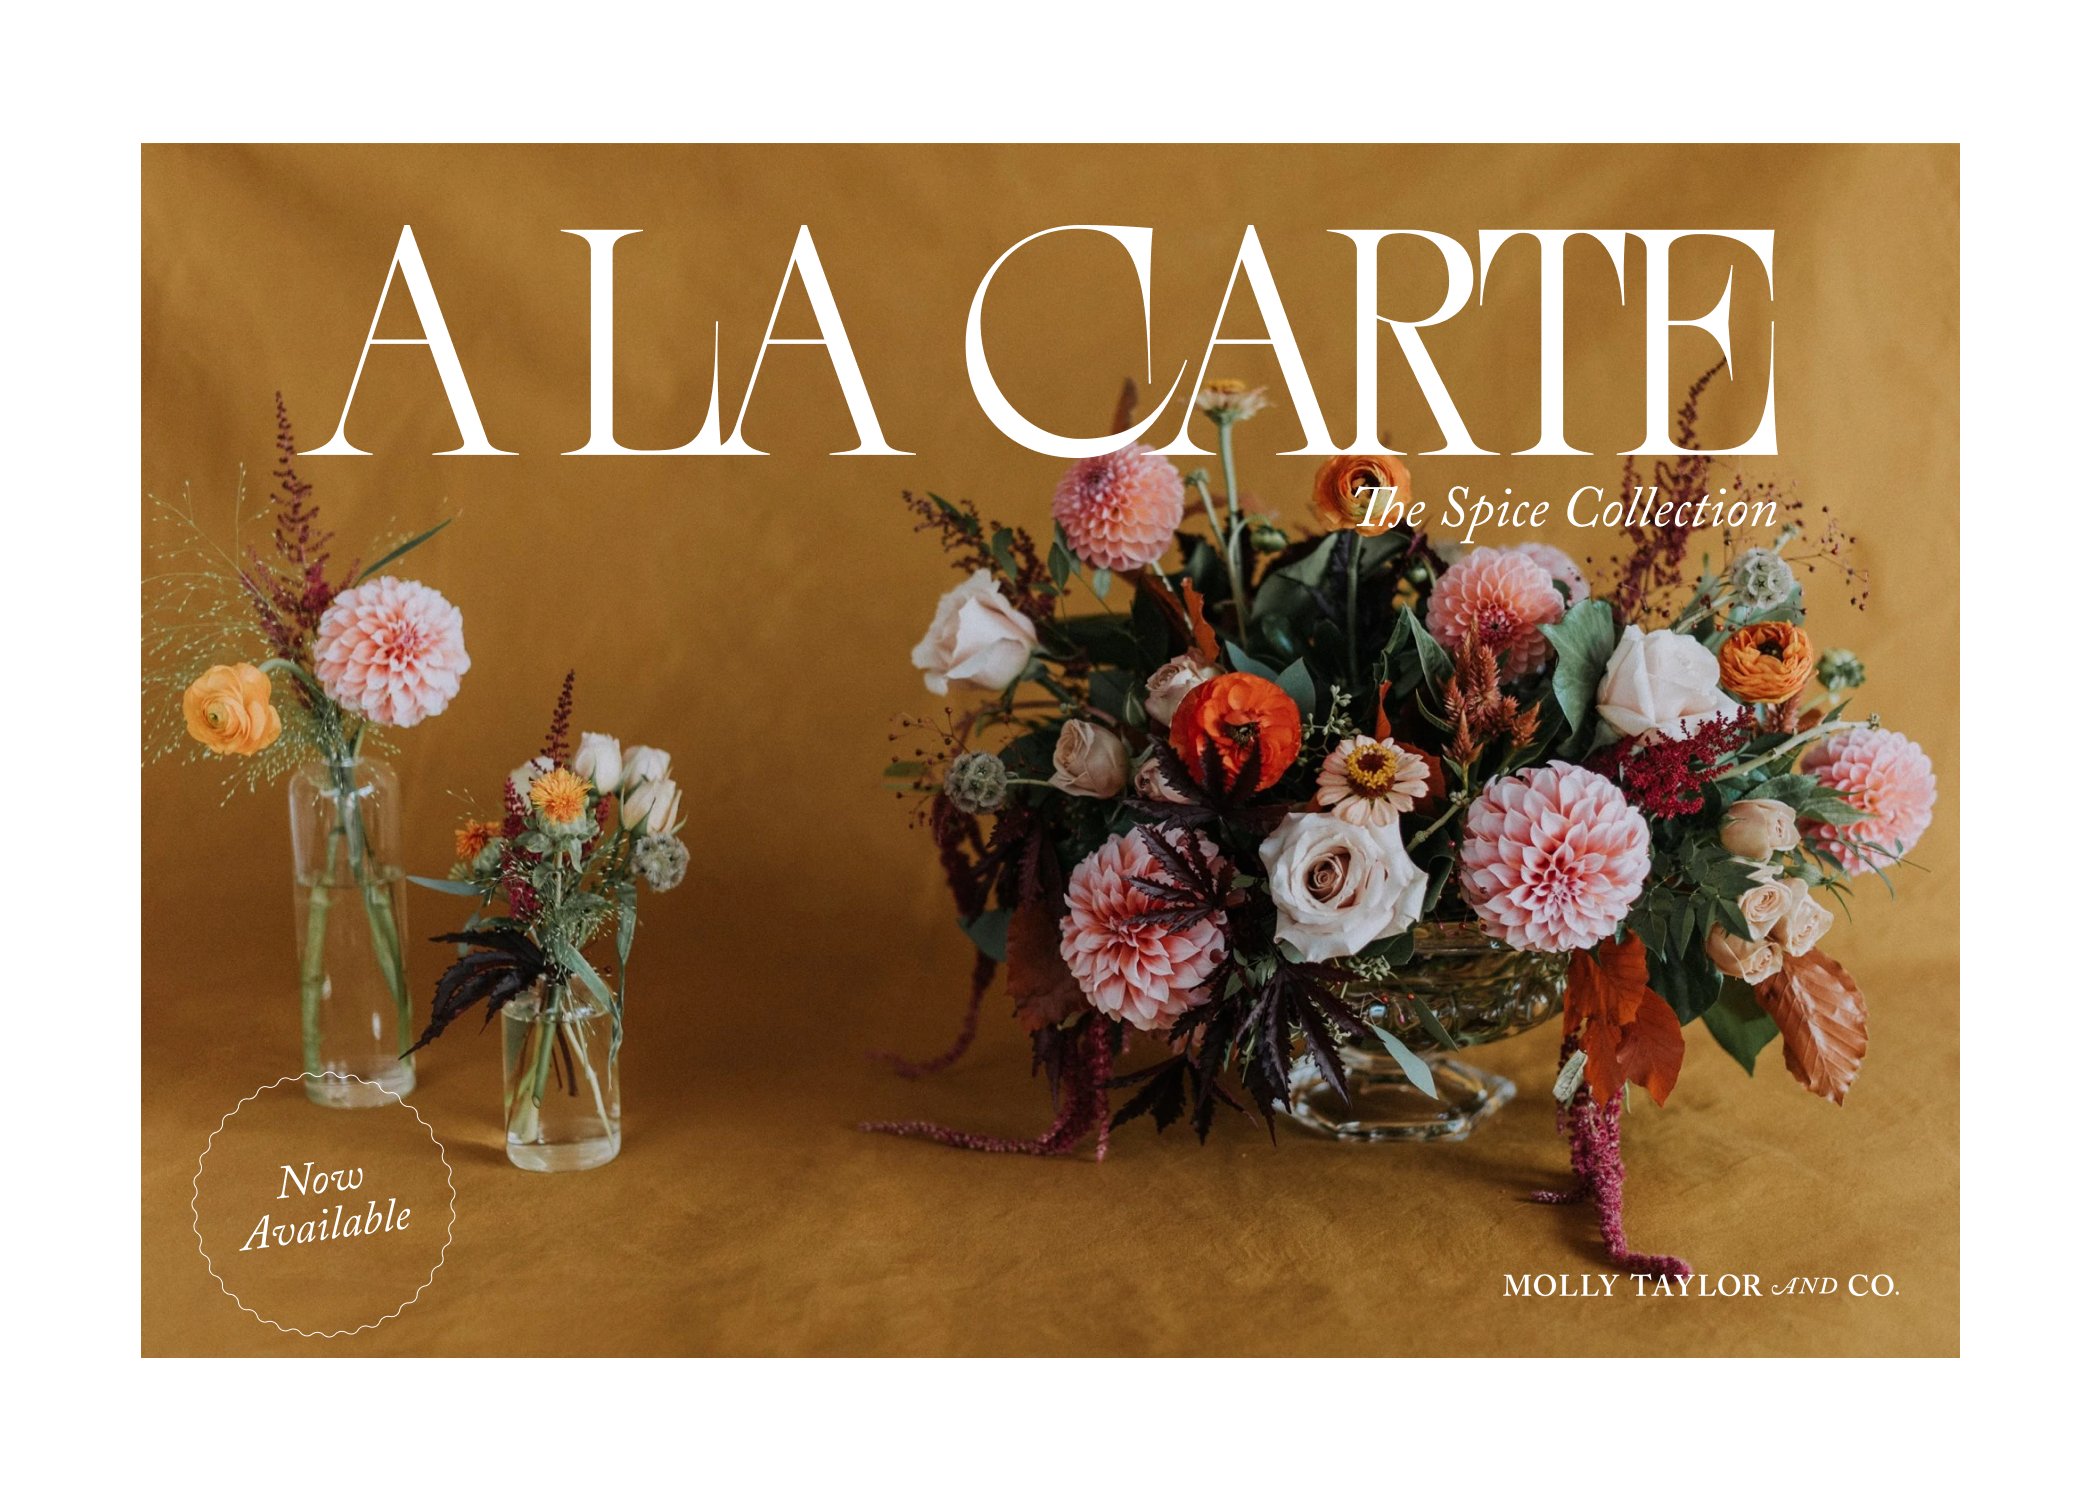 A La Carte - The Spice Collection - Molly Taylor and Co.